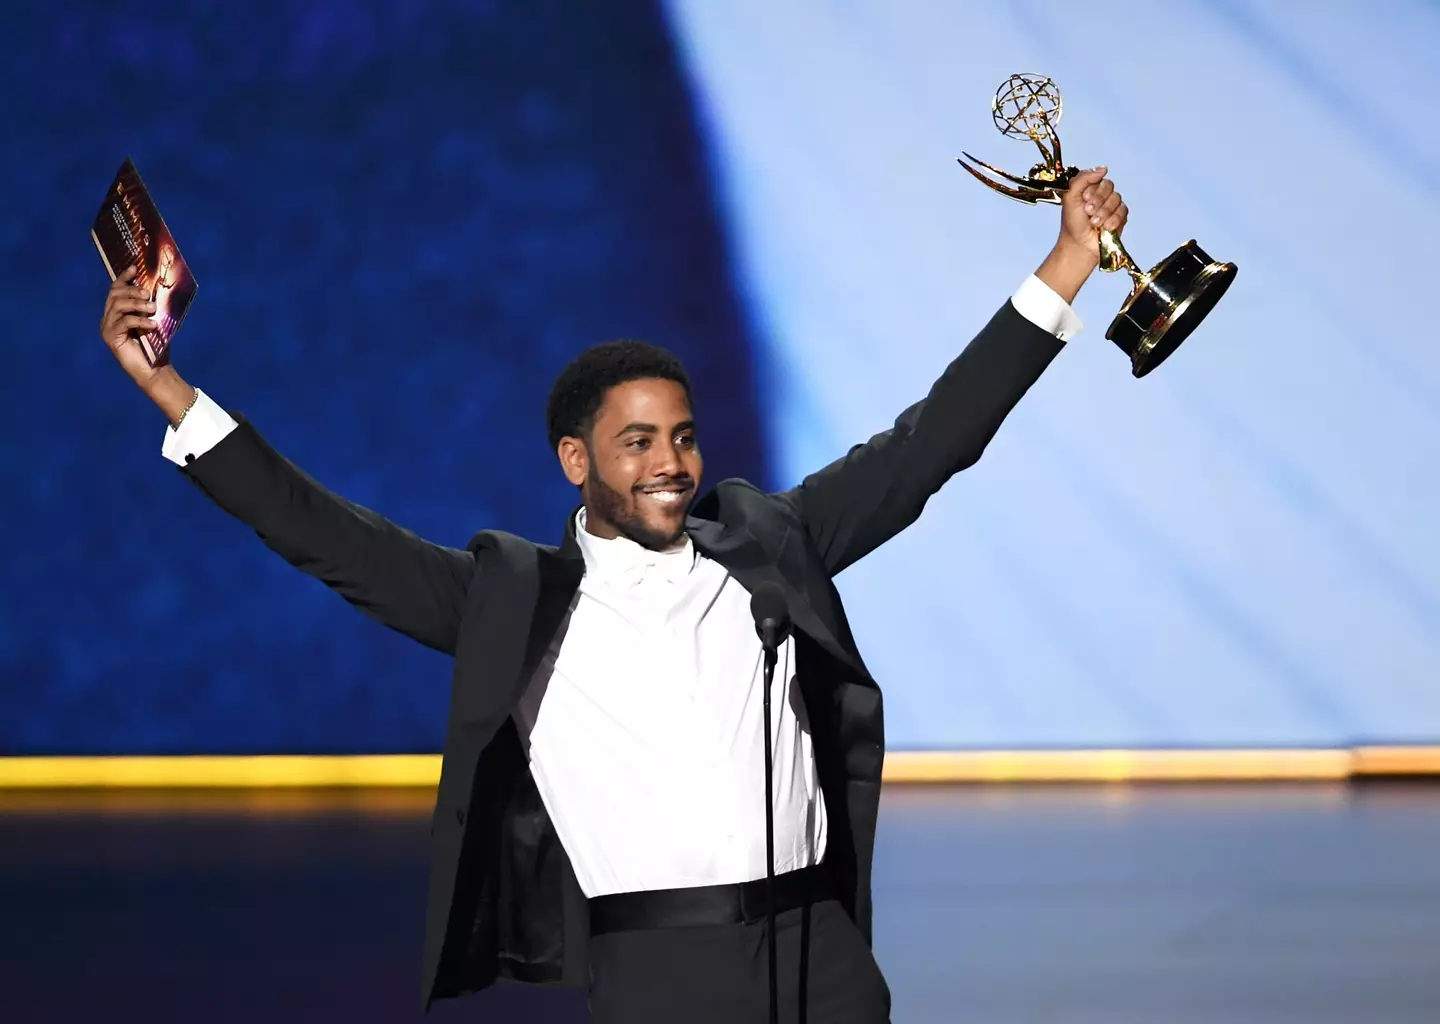 Jharrel Jerome won an Emmy for Outstanding Lead Actor.